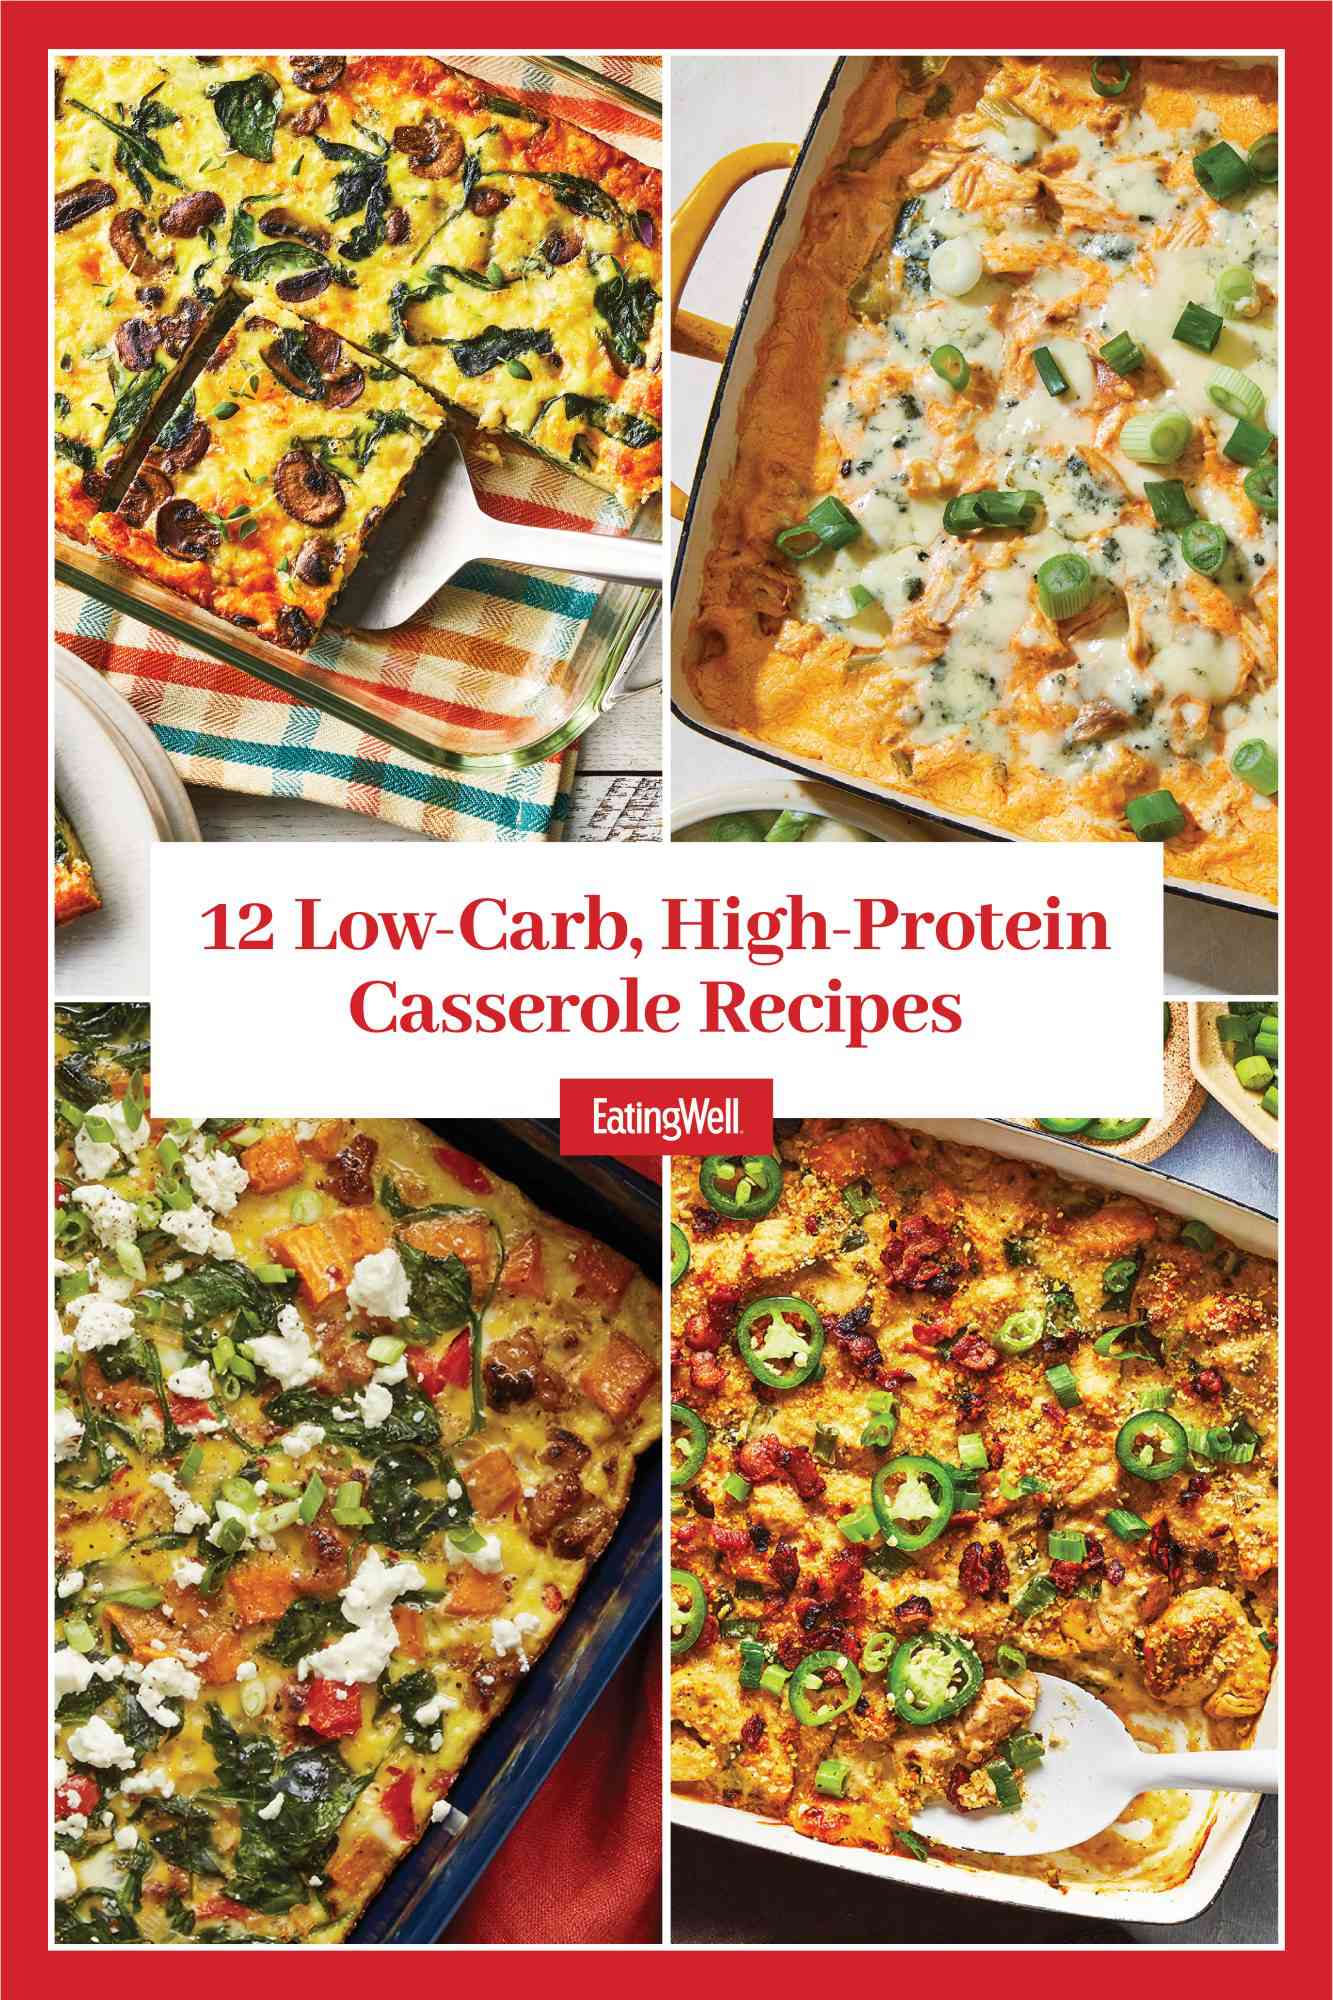 a collage of some of the 12 Low-Carb, High Protein Casserole Recipes